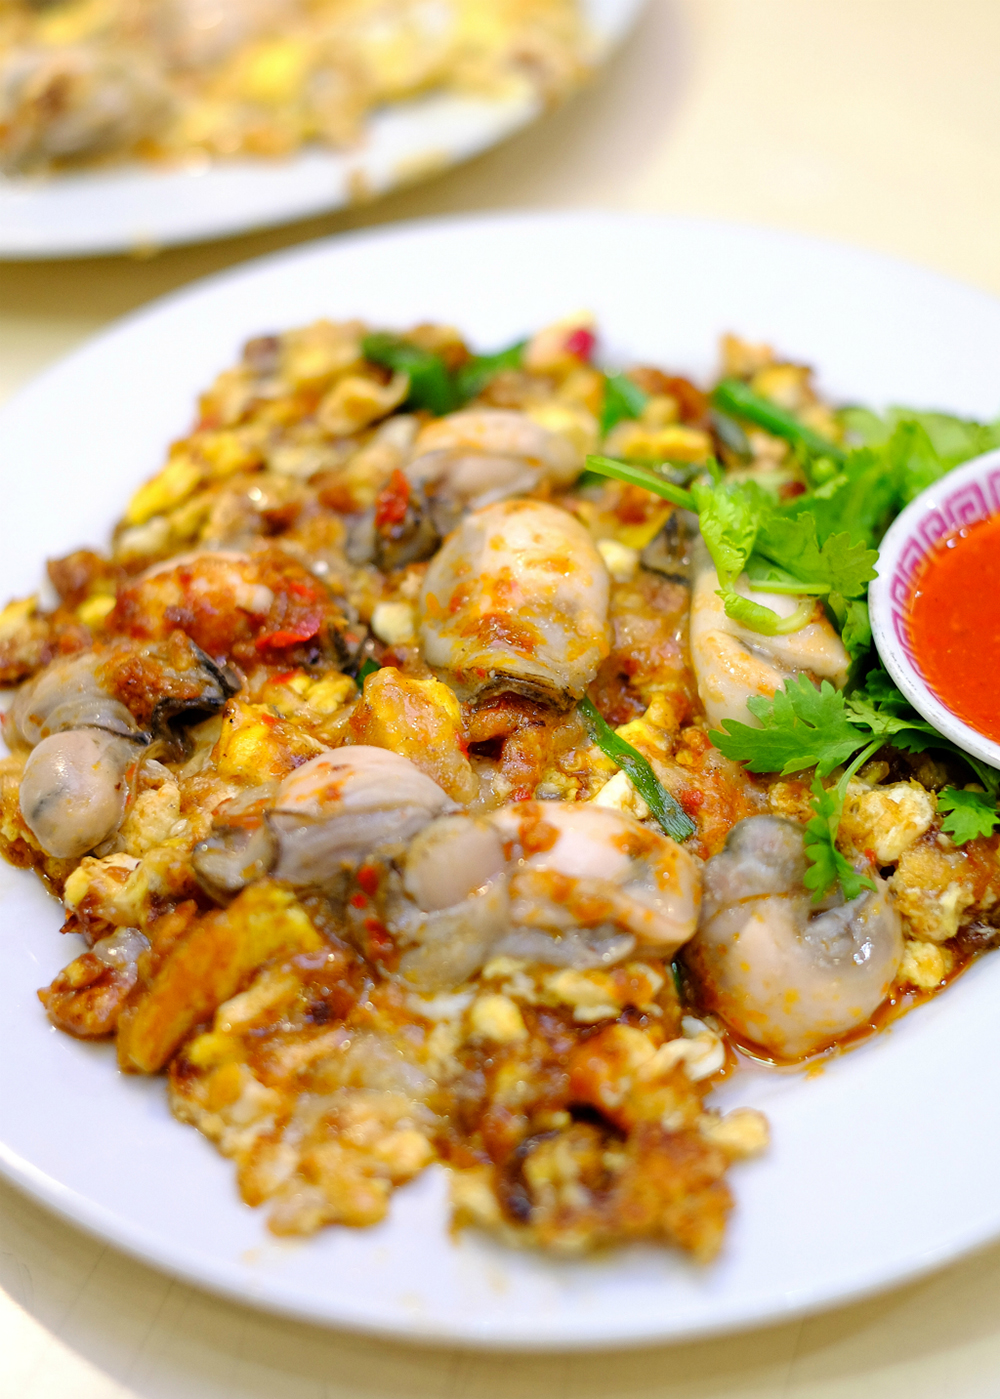 Lim's Fried Oyster Omelette